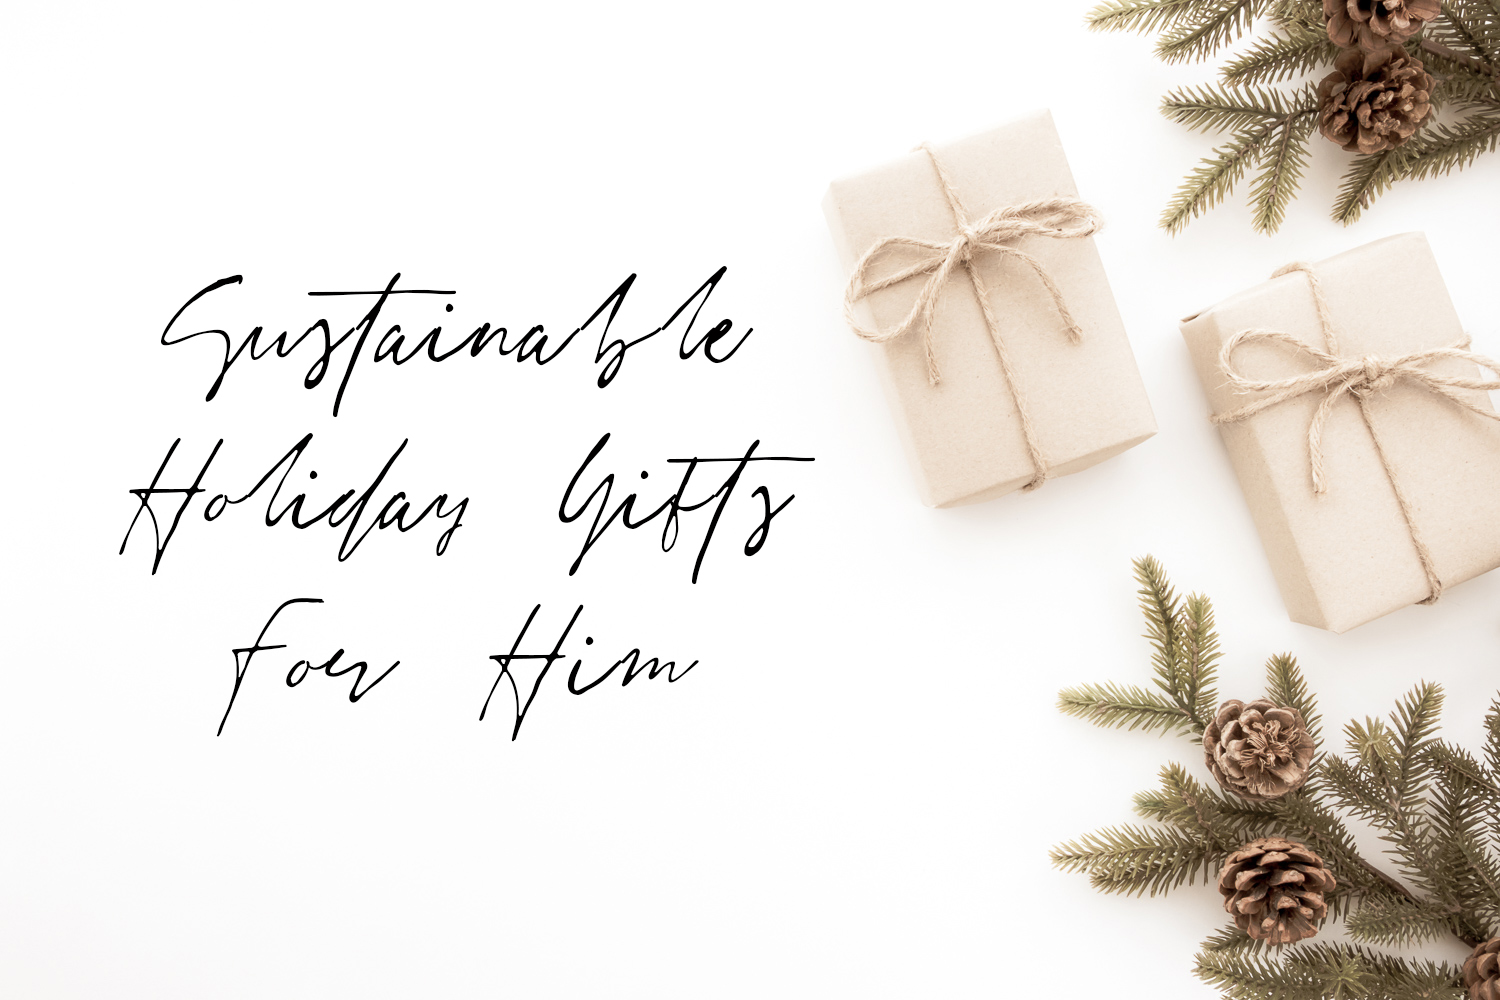 The Sustainable Holiday Gift Guides: Gifts for Him